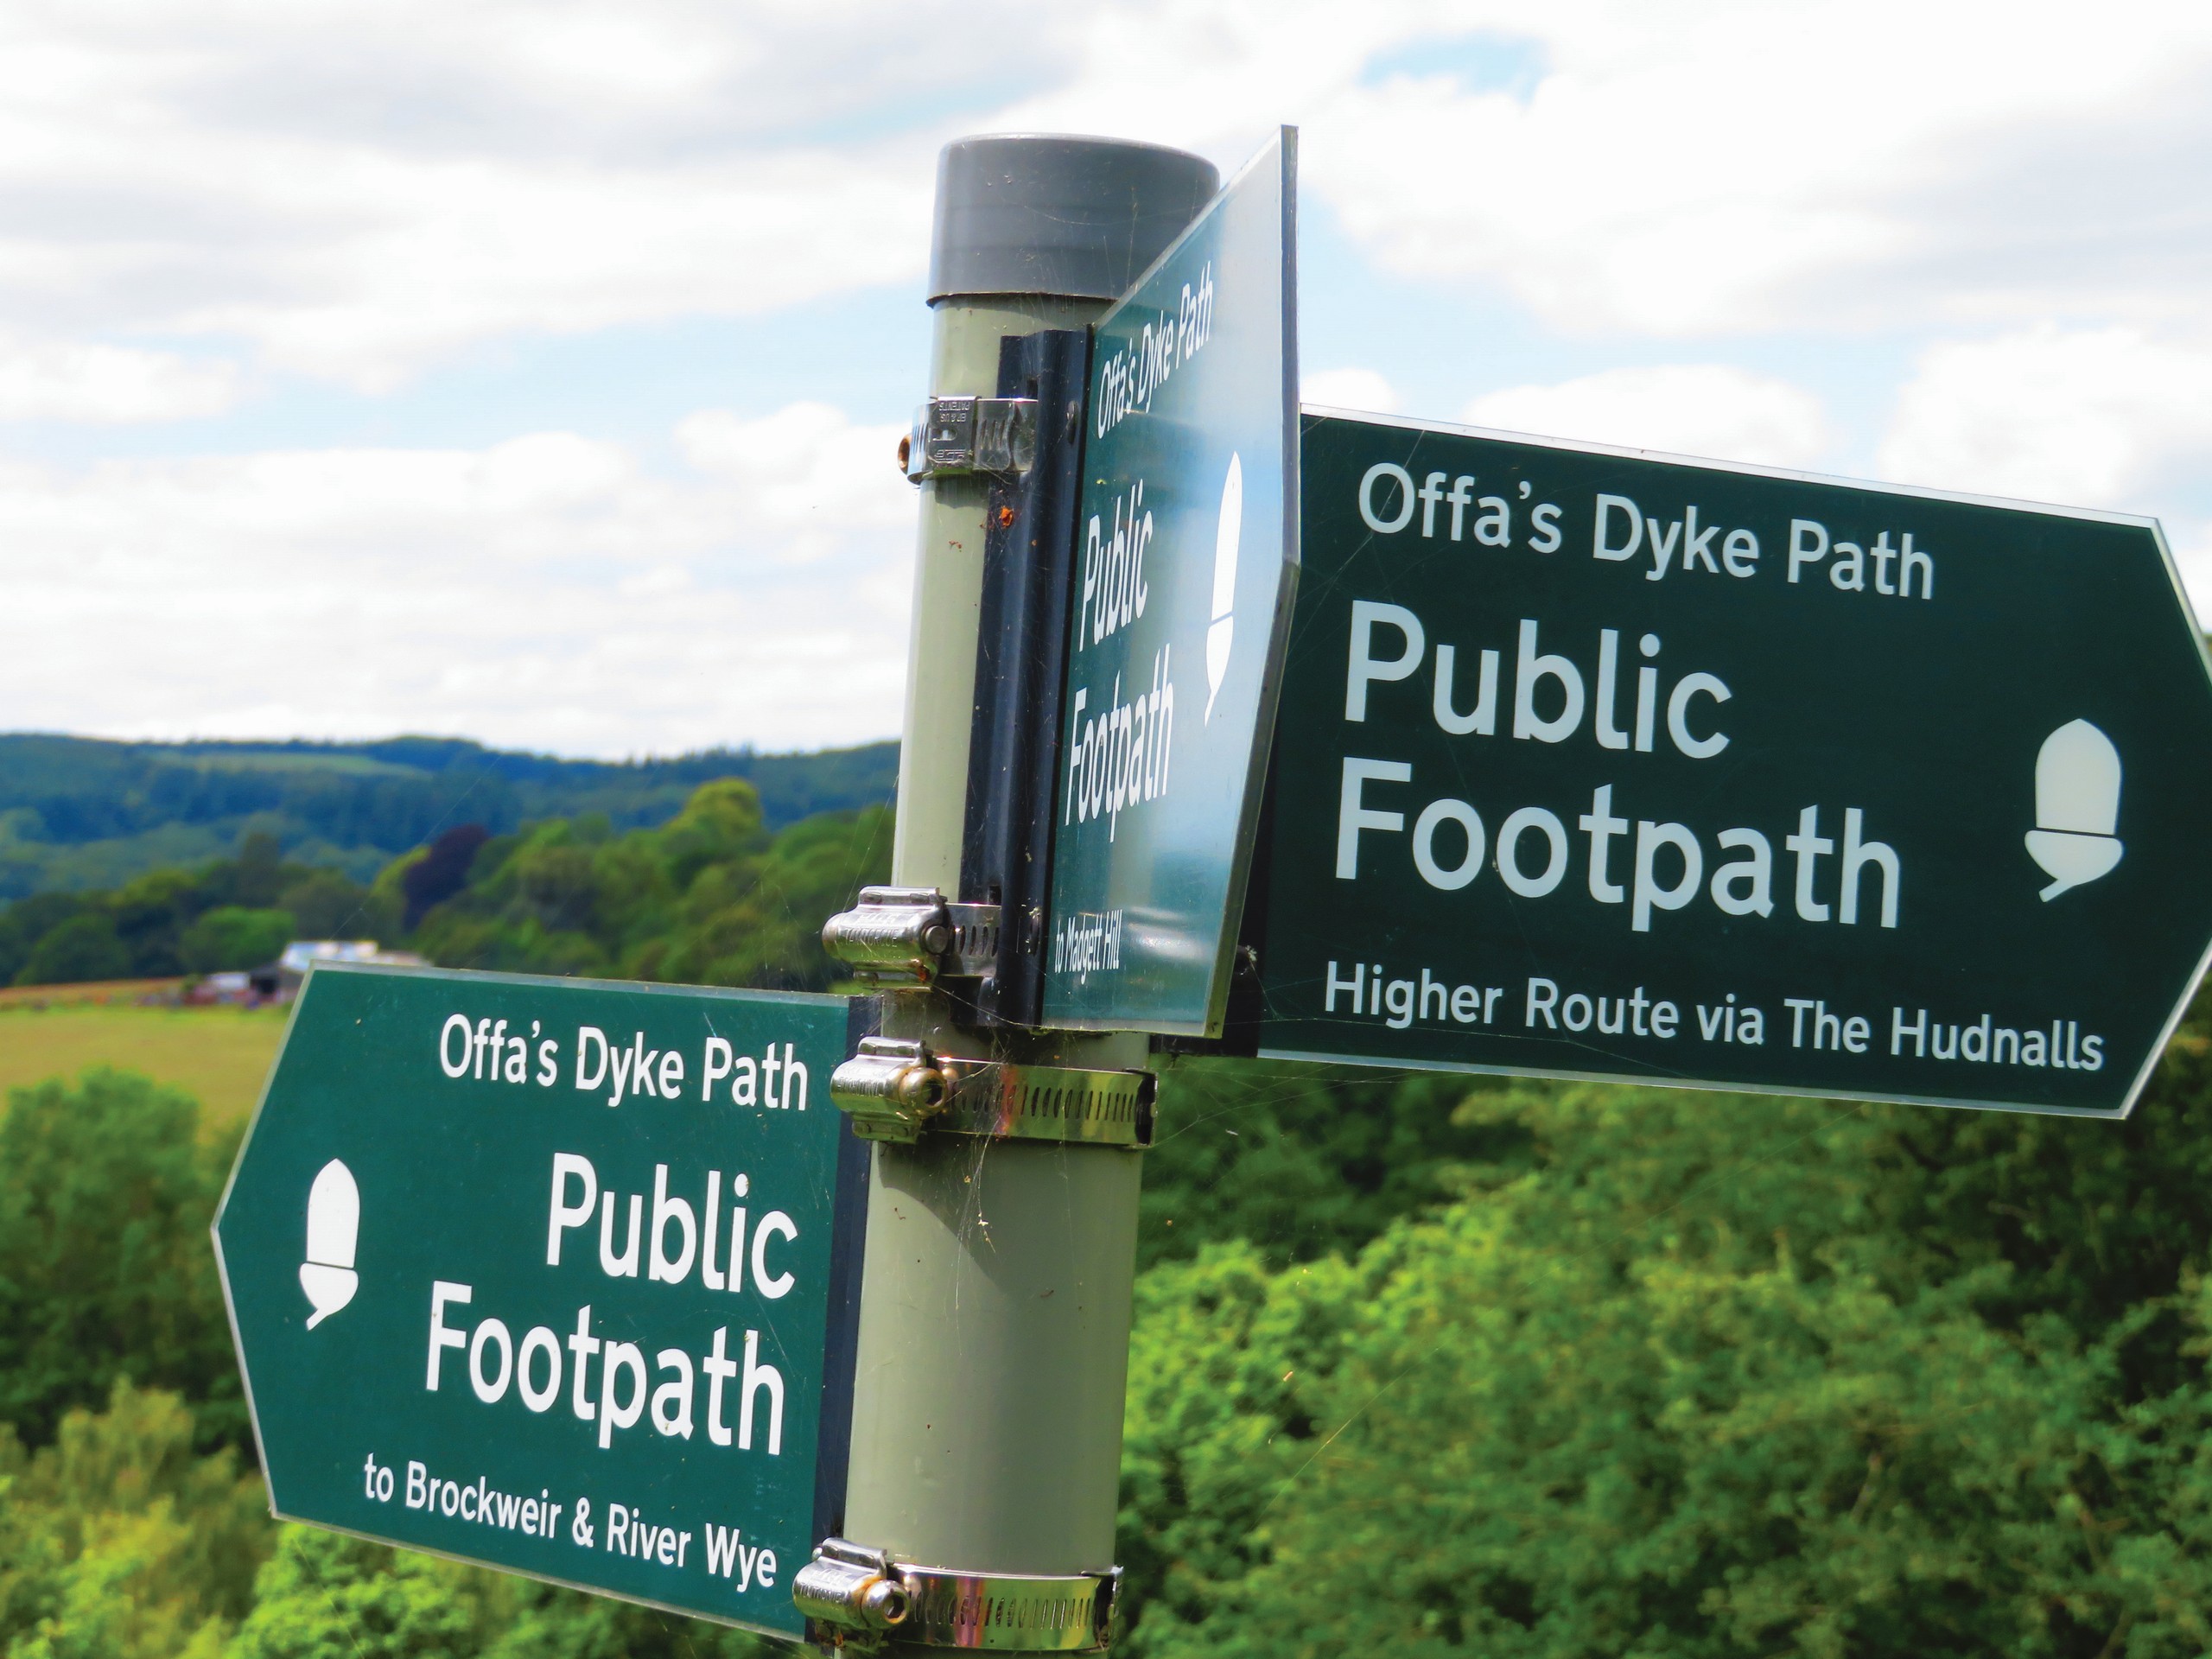 Waypoints along the Offa's Dyke path in England